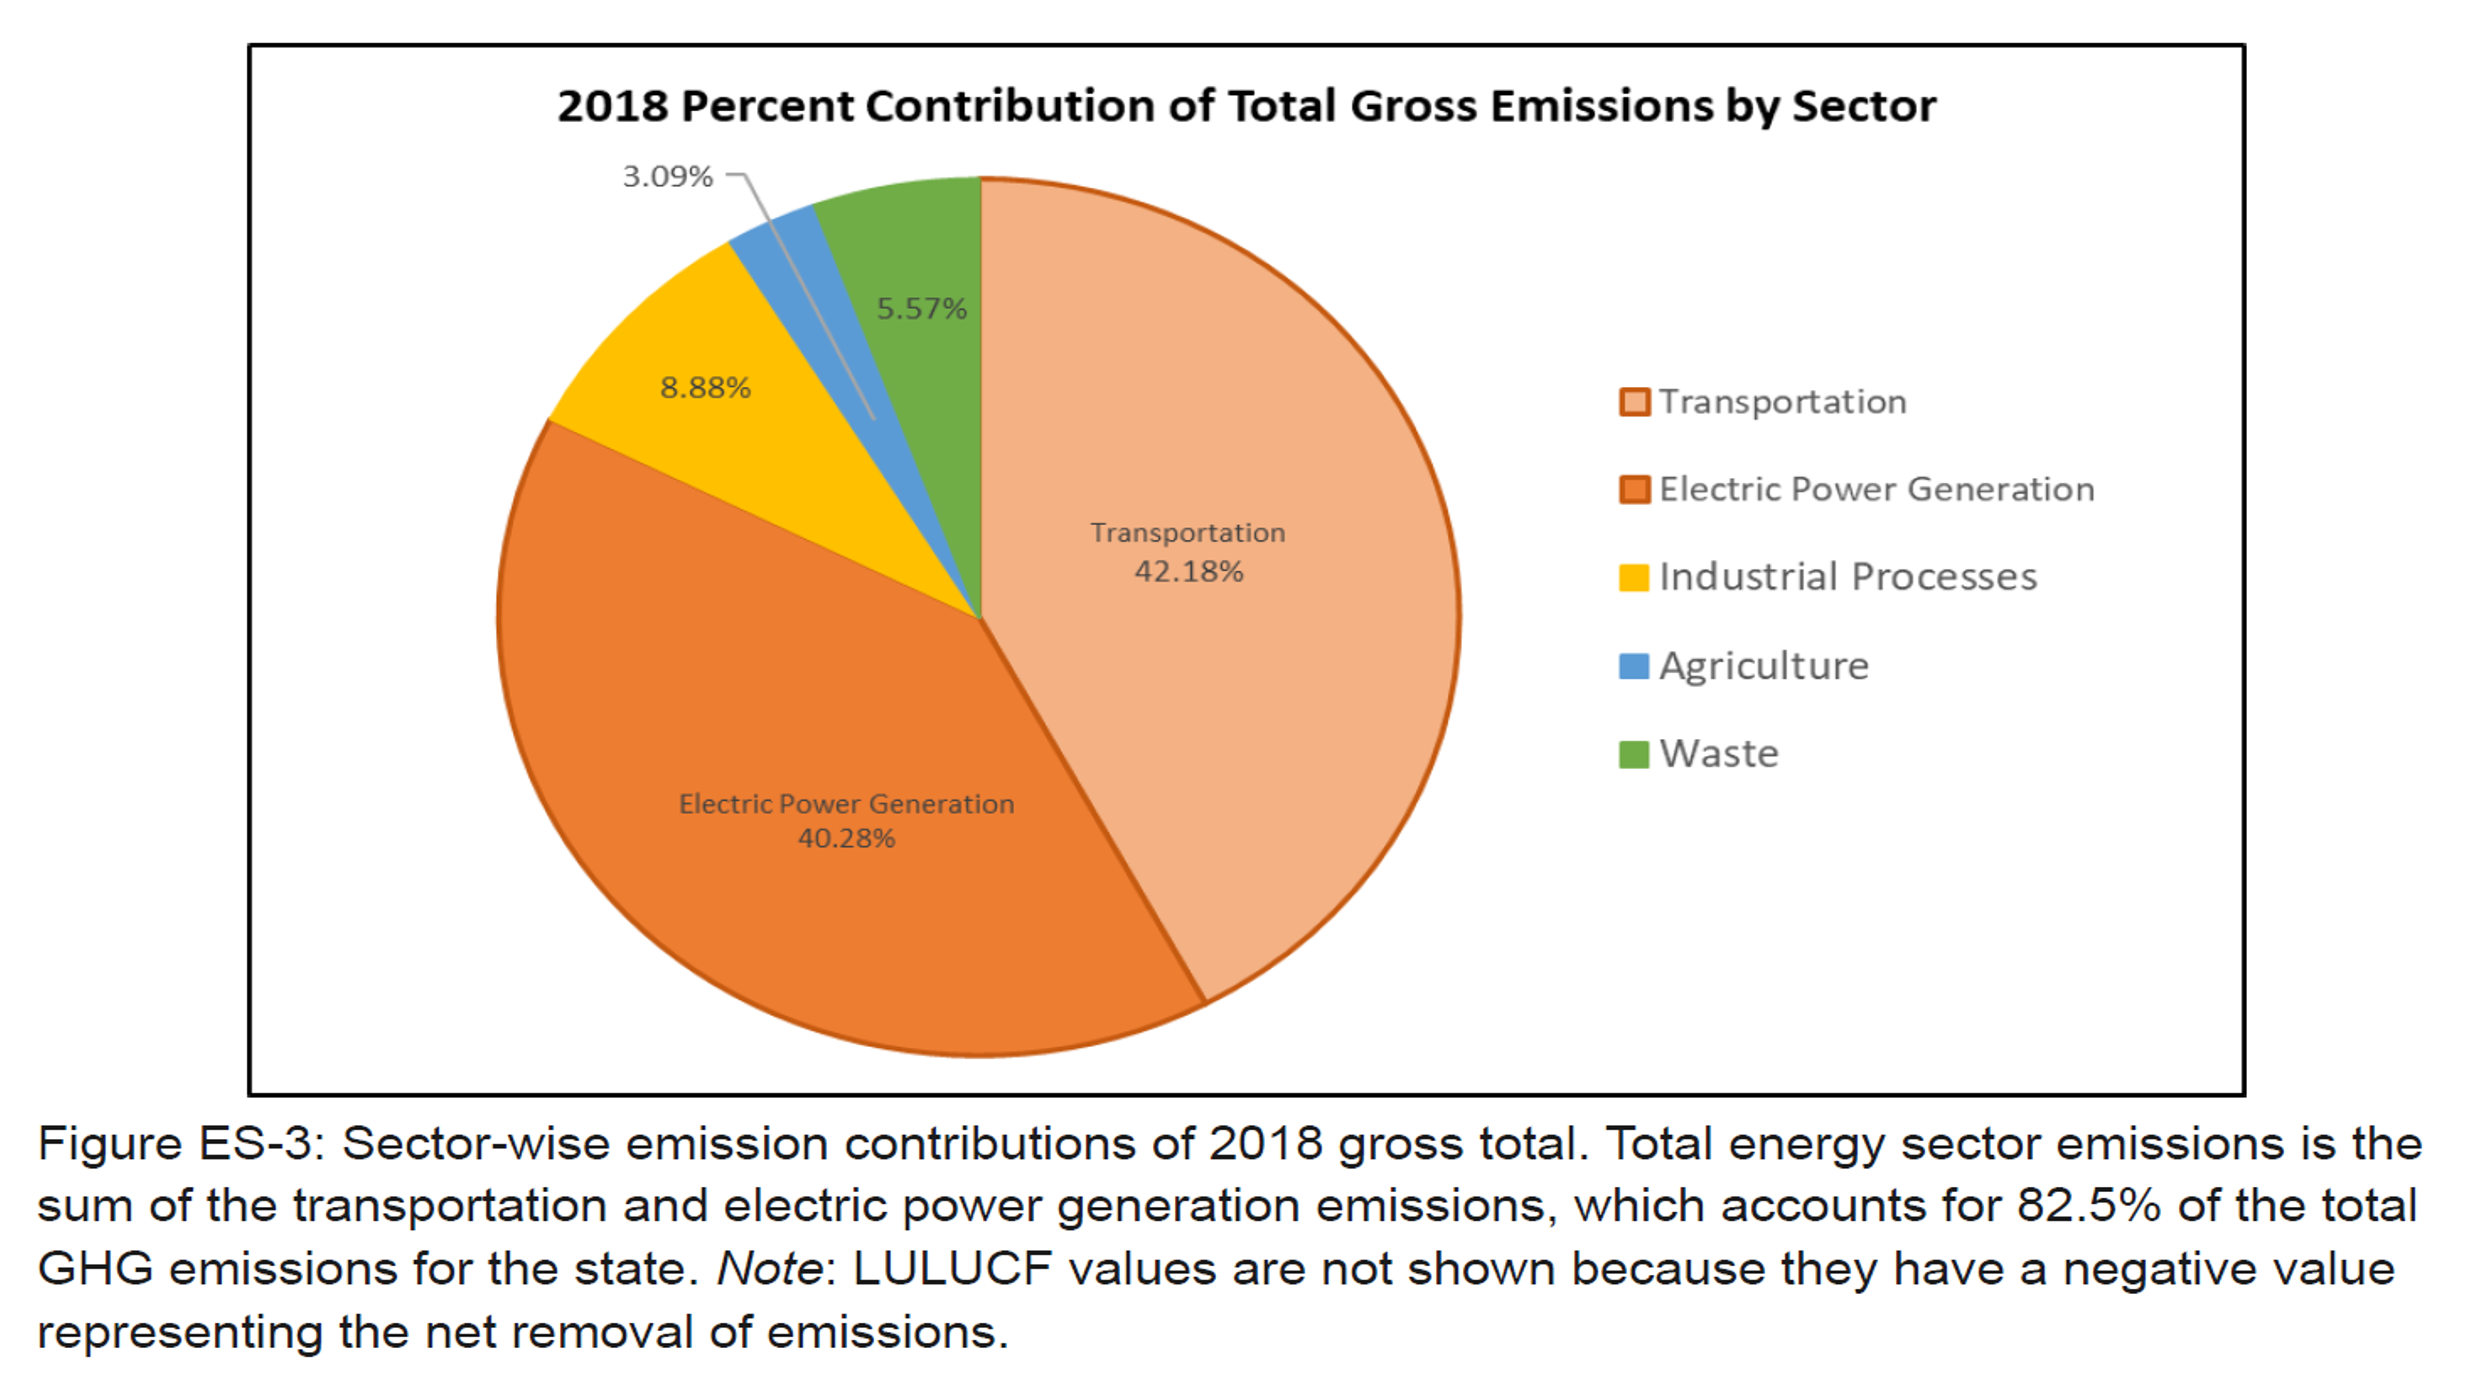 Contribution of Emissions by Sector